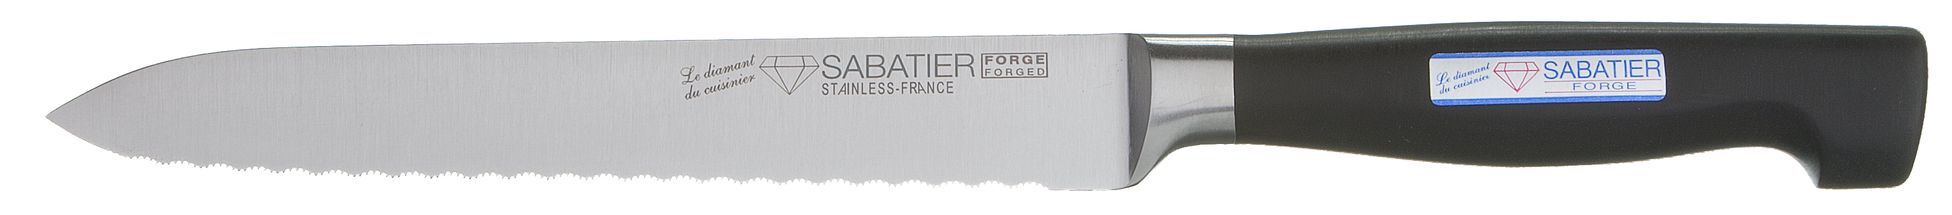 Diamant Sabatier Utility Knife Forge Rigged 14 cm